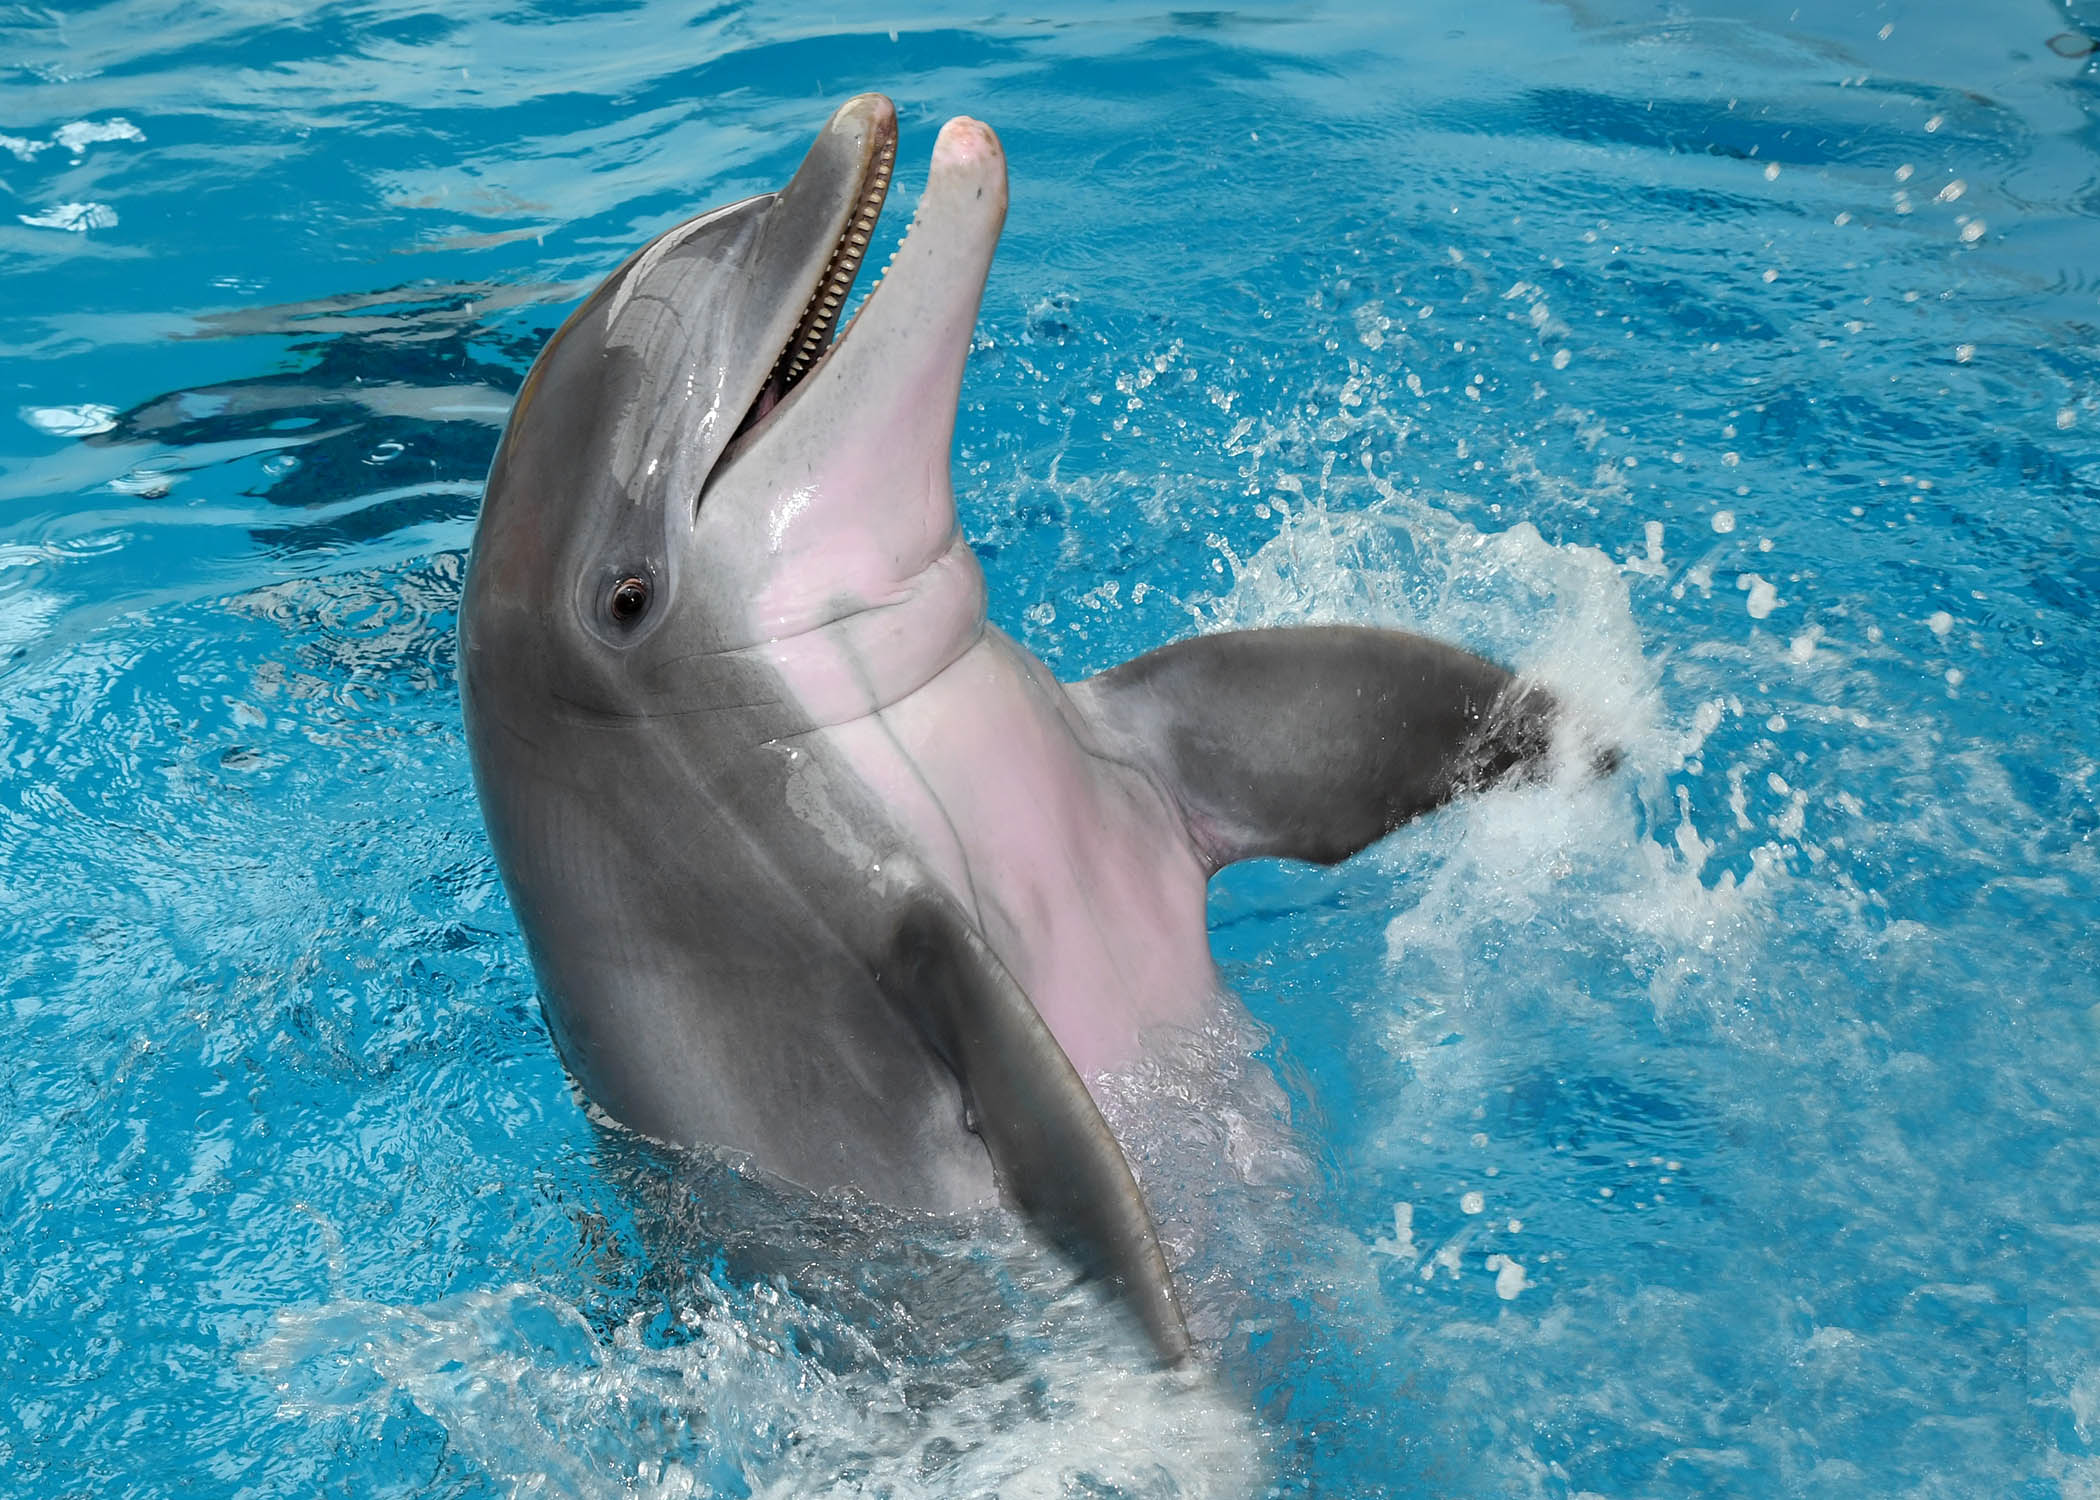 Chicago Zoological Society - Complex Environmental Enrichment for Dolphins